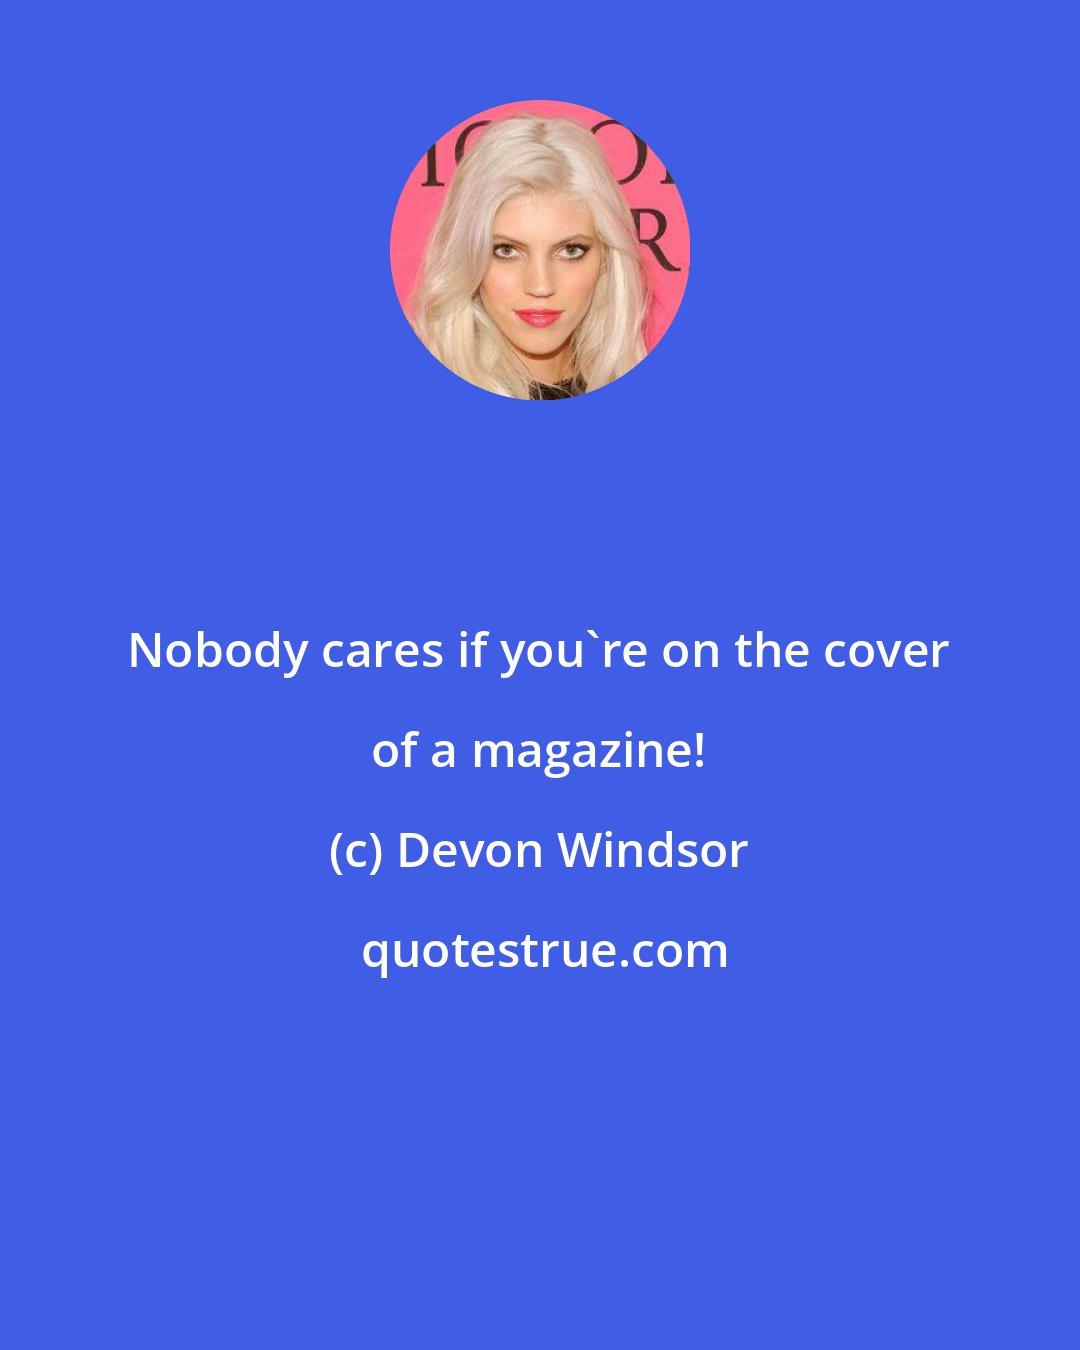 Devon Windsor: Nobody cares if you're on the cover of a magazine!